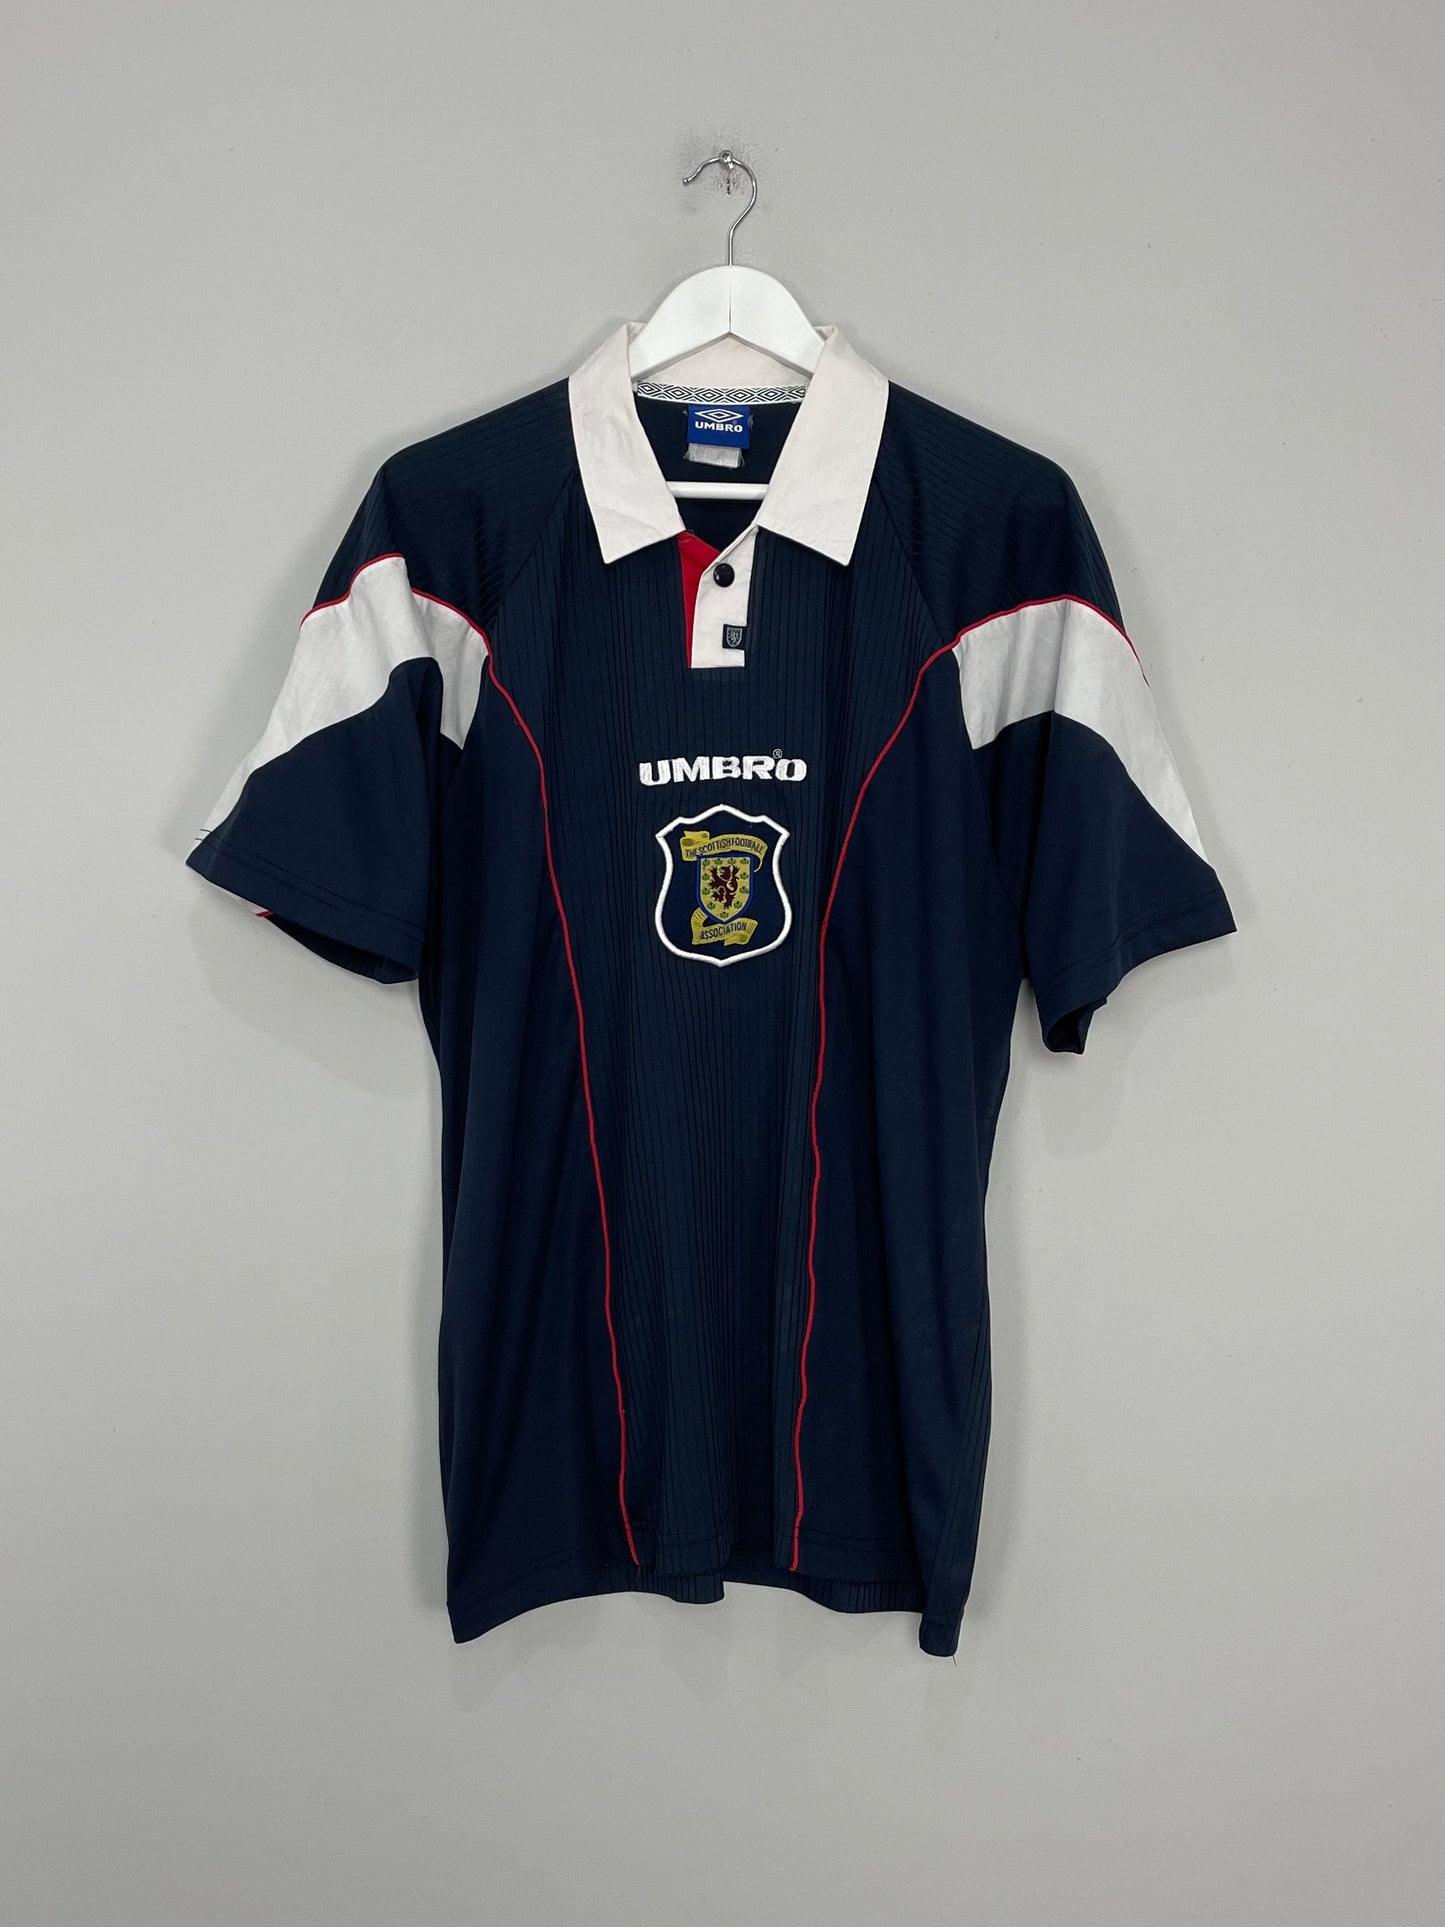 Image of the Scotland shirt from the 1996/98 season